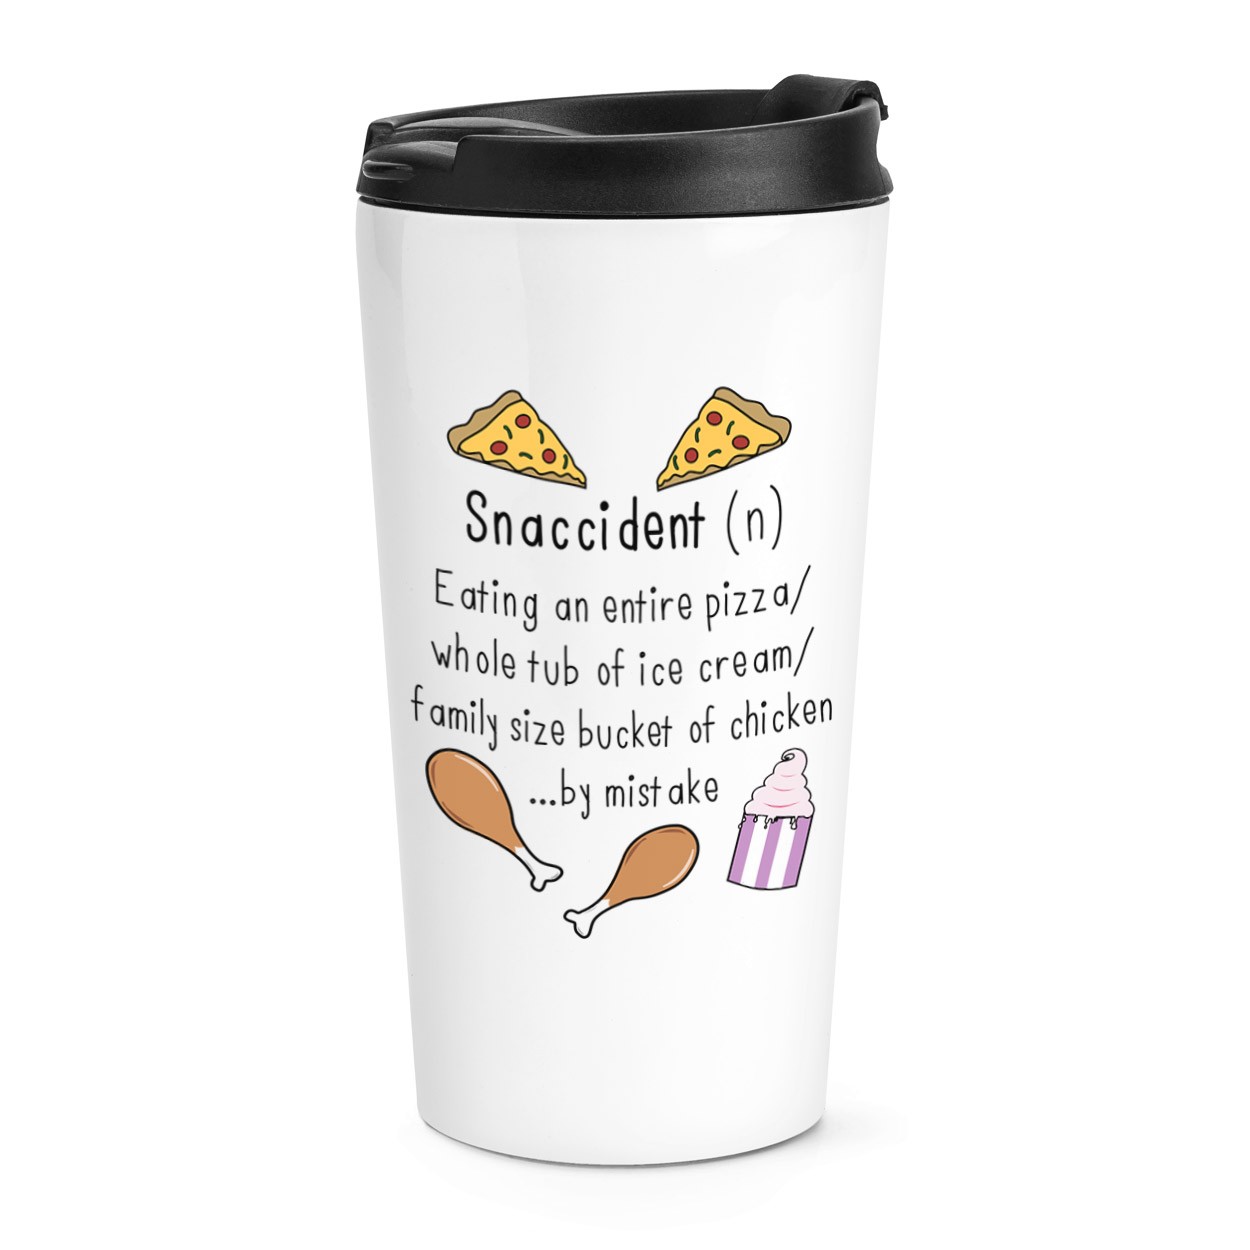 Snaccident Definition Travel Mug Cup